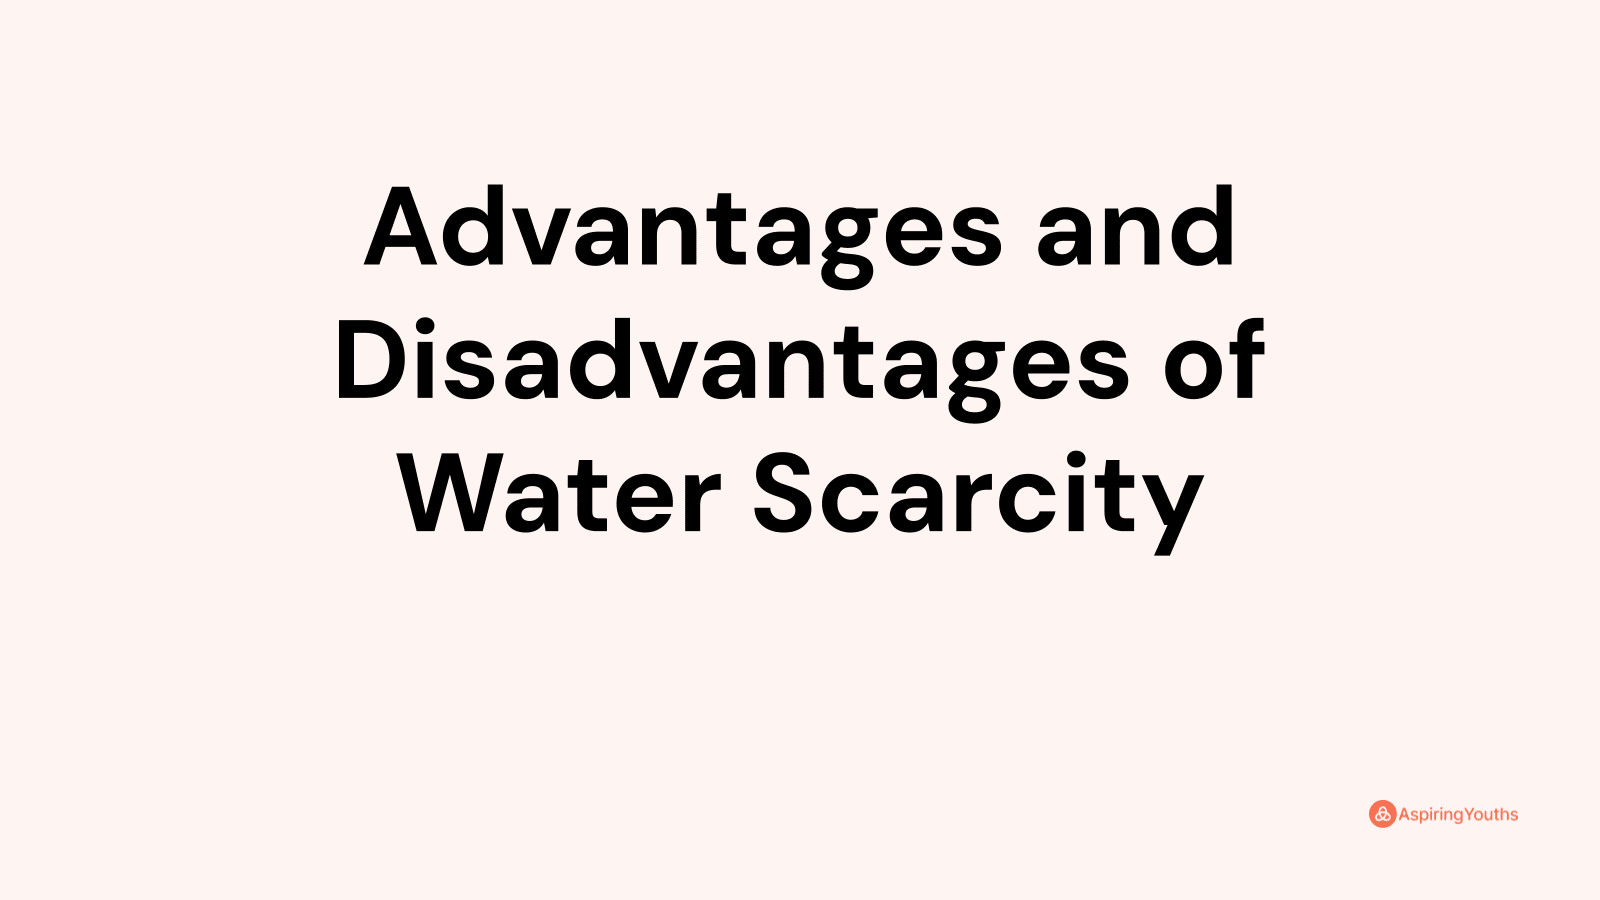 Advantages and disadvantages of Water Scarcity